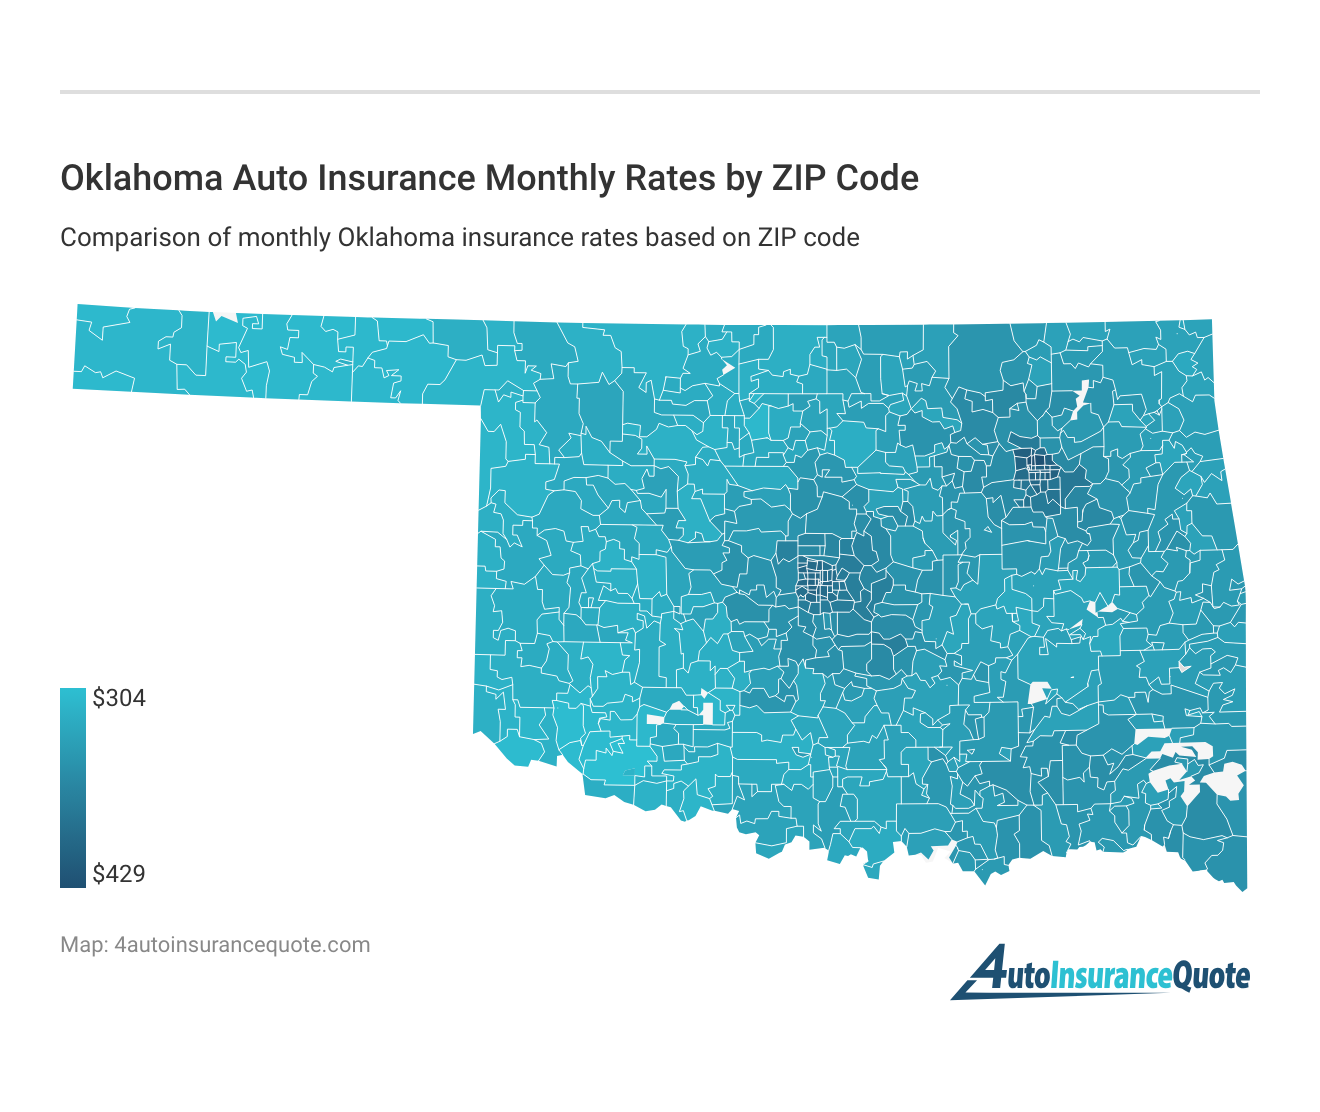 <h3>Oklahoma Auto Insurance Monthly Rates by ZIP Code</h3>